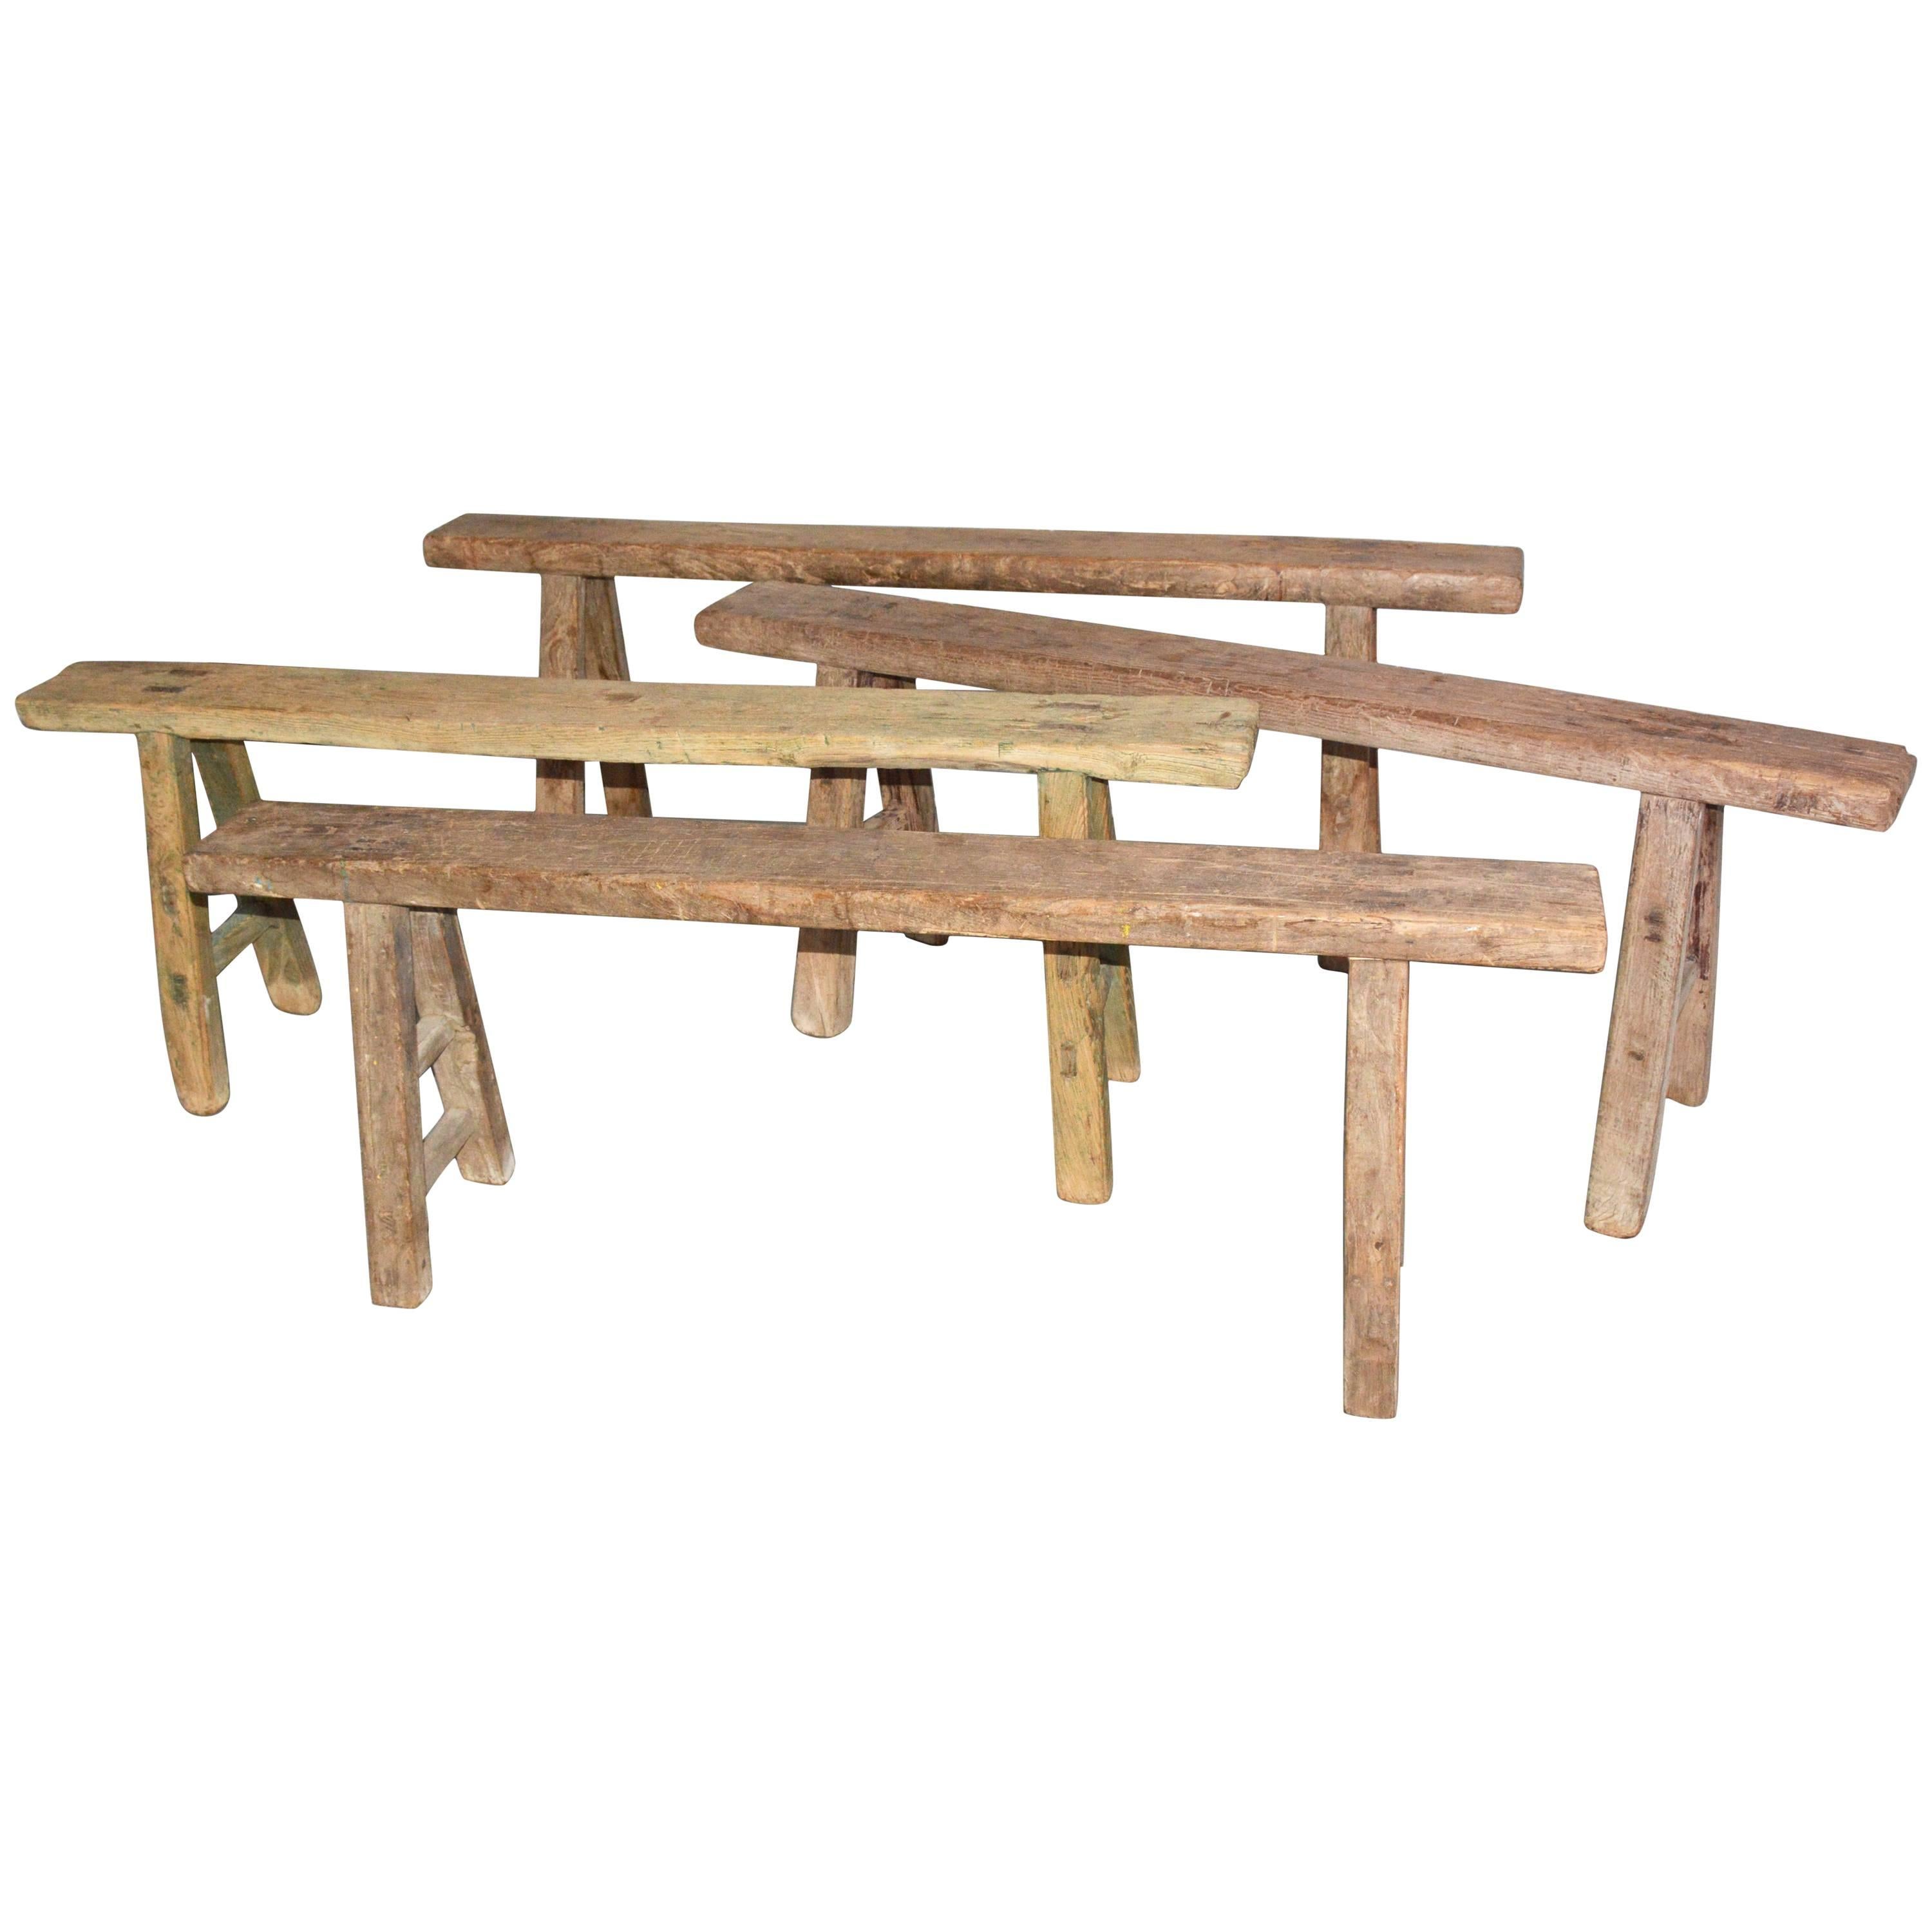 Four Rustic Antique Asian Teak Benches Sold Singly